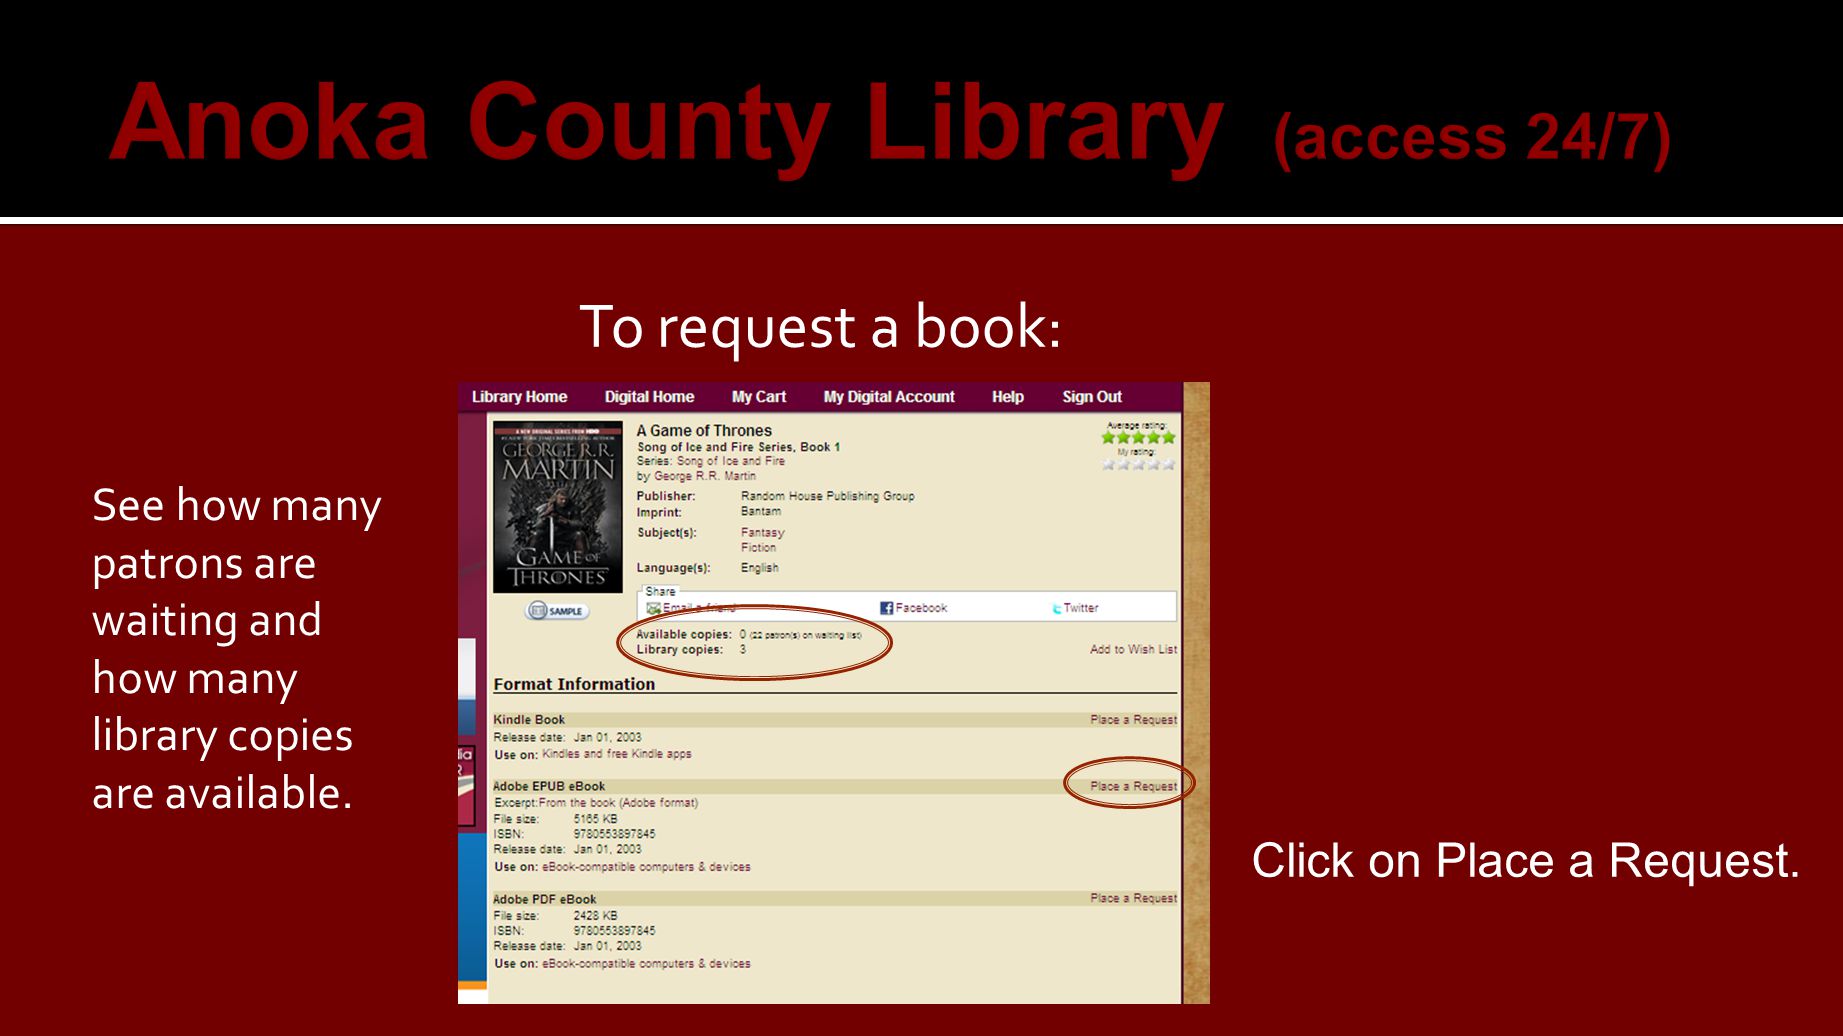 To request a book: Click on Place a Request.